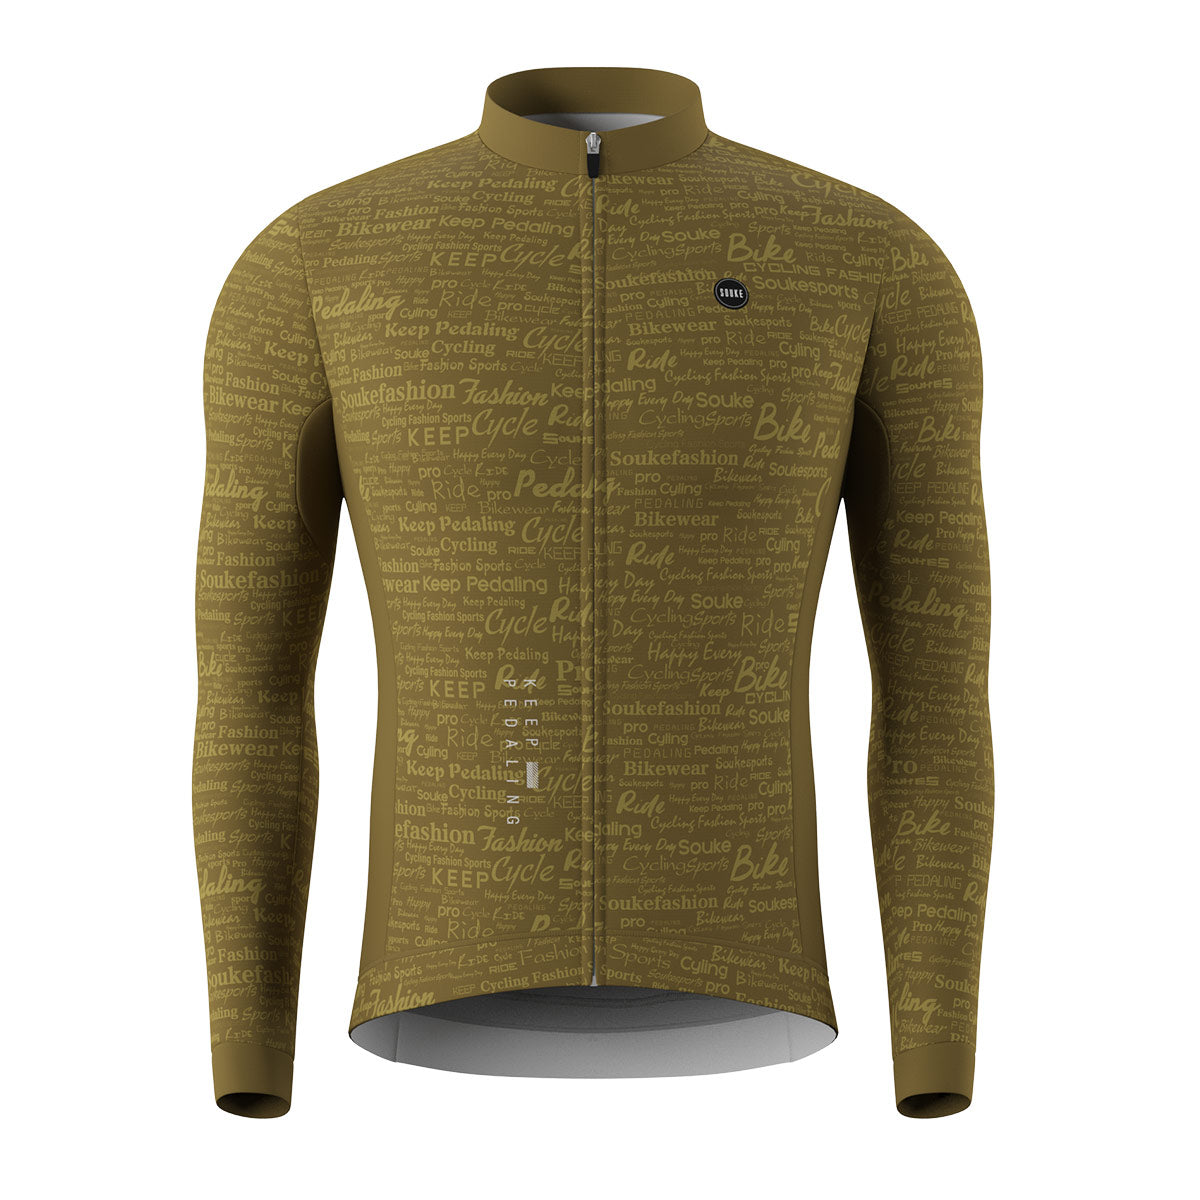 cycling long sleeve jersey, Graphene jersey,jersey for winter,ginger long jersey,jersey for winter and autumn, cold weather jersey (6793675636849)